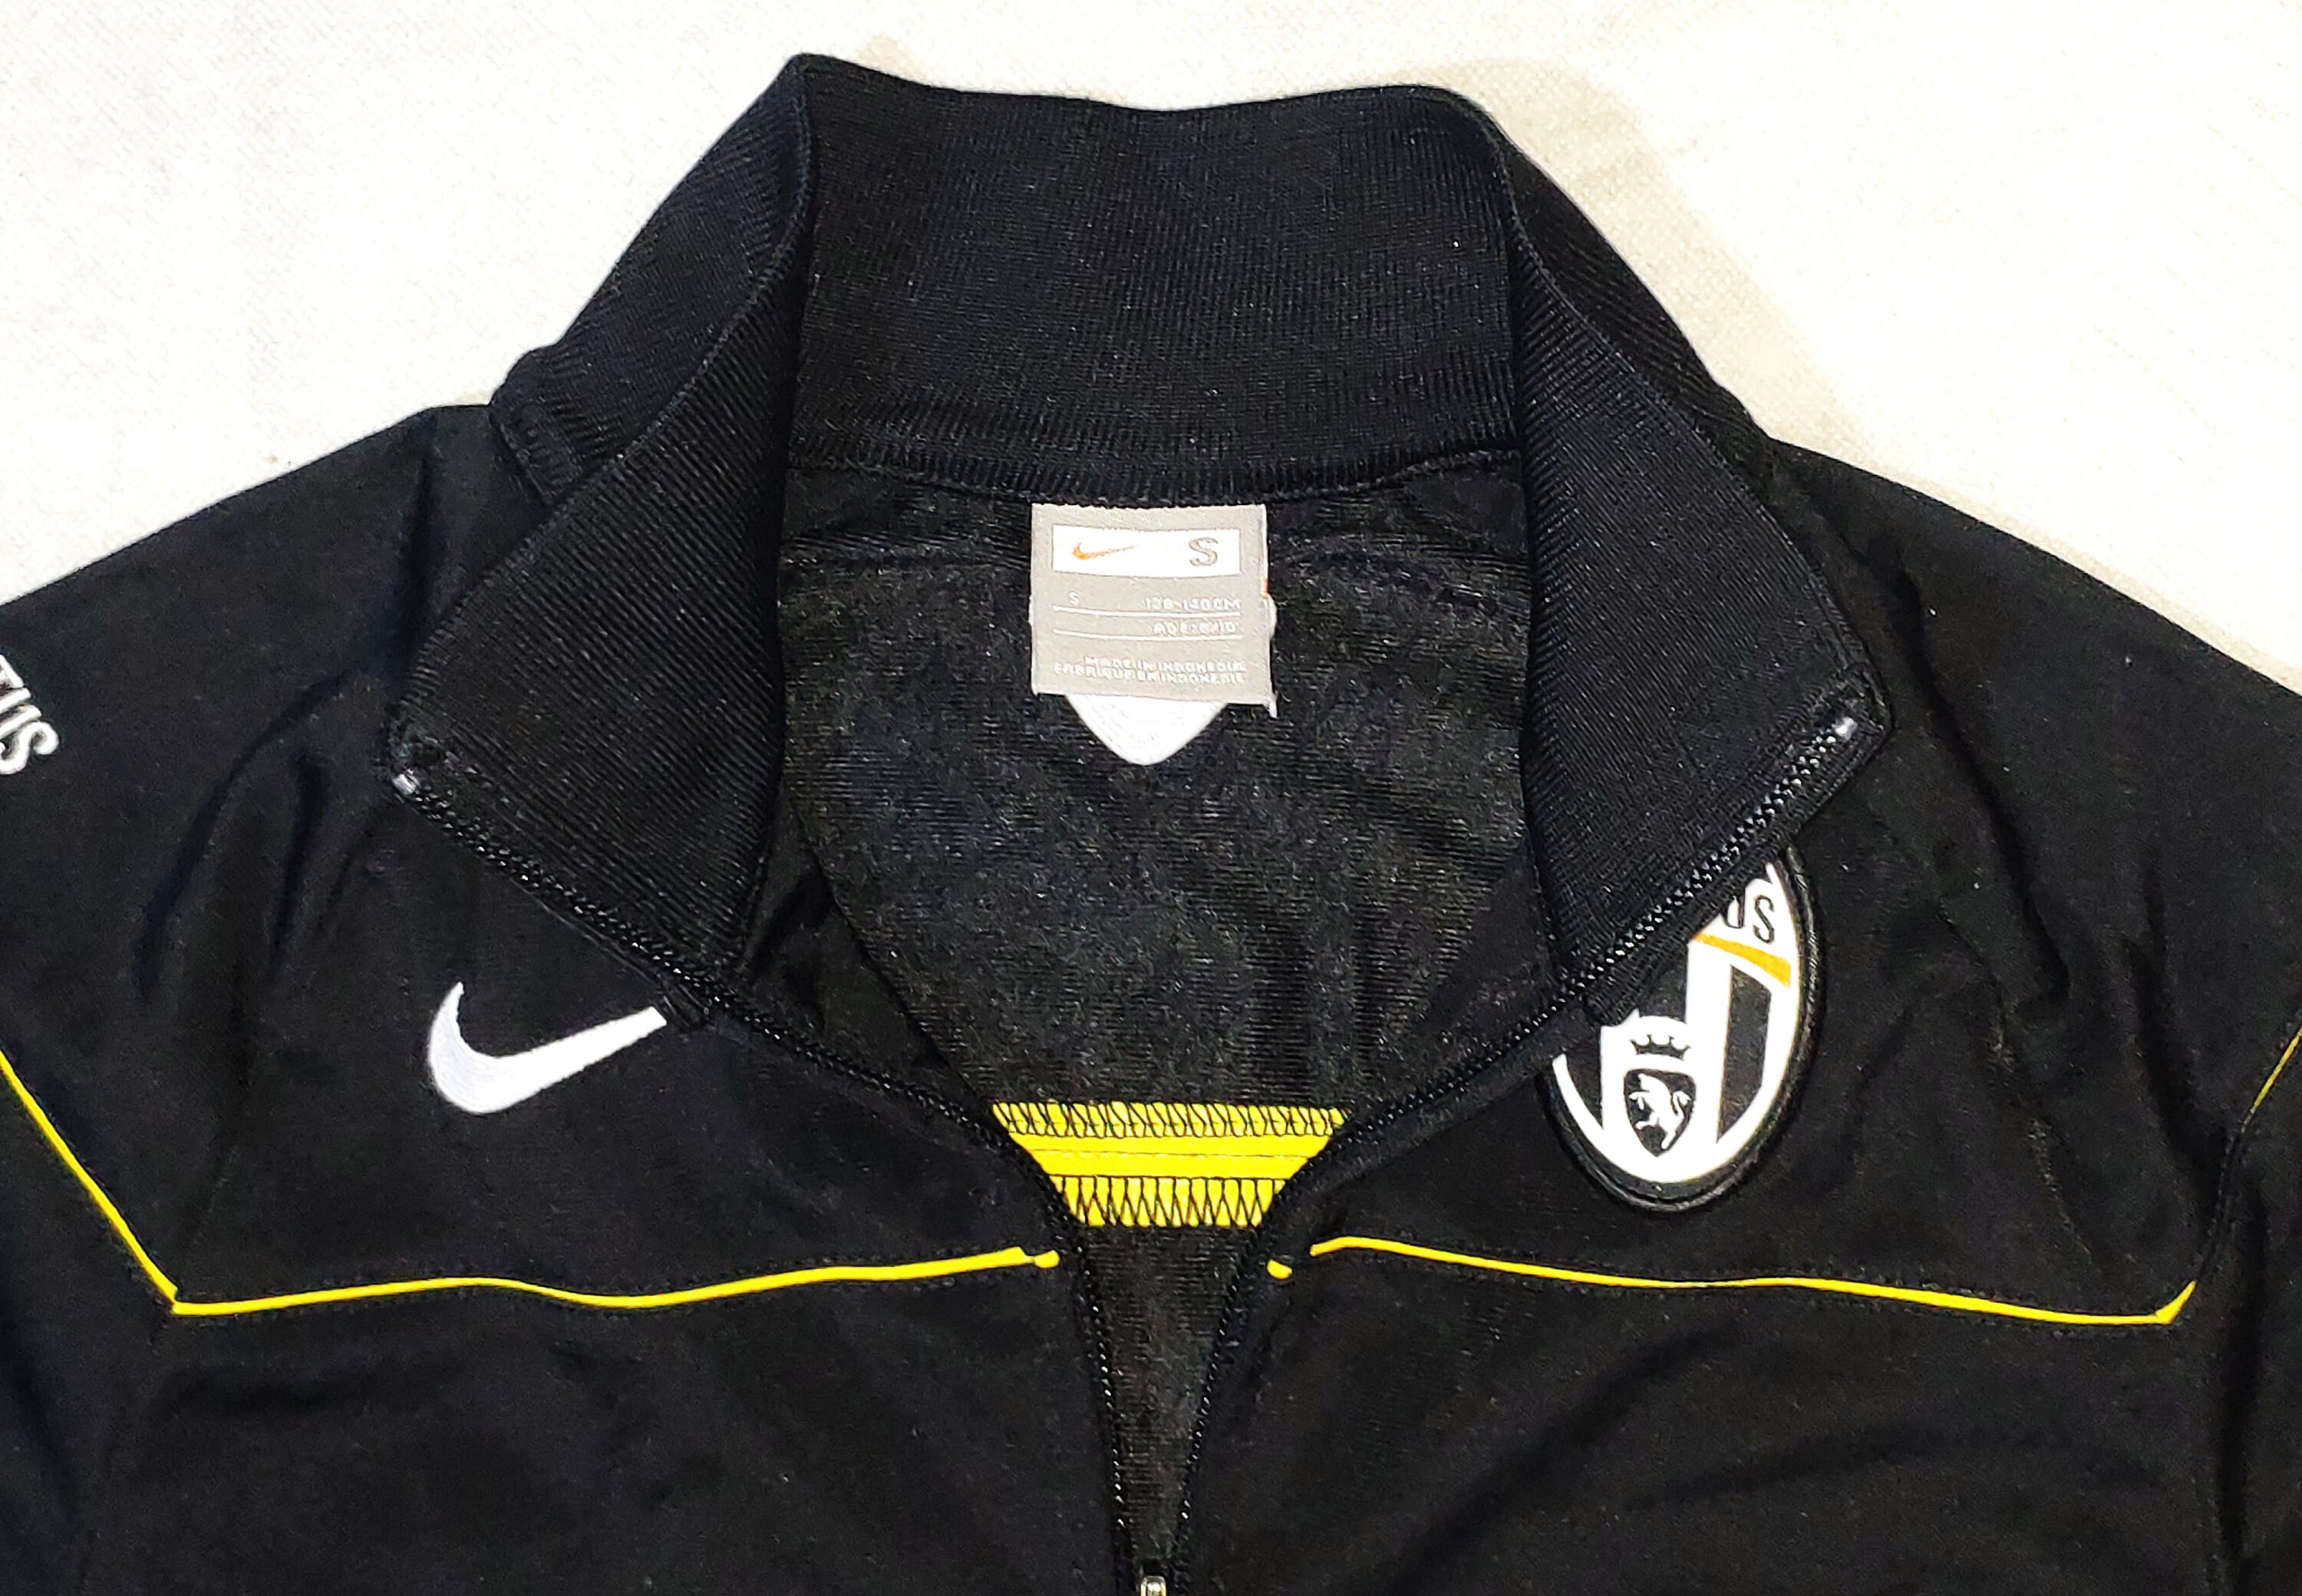 Madison Completo Parche Juventus Official Football Soccer Training Jacket by Nike - Etsy Hong Kong